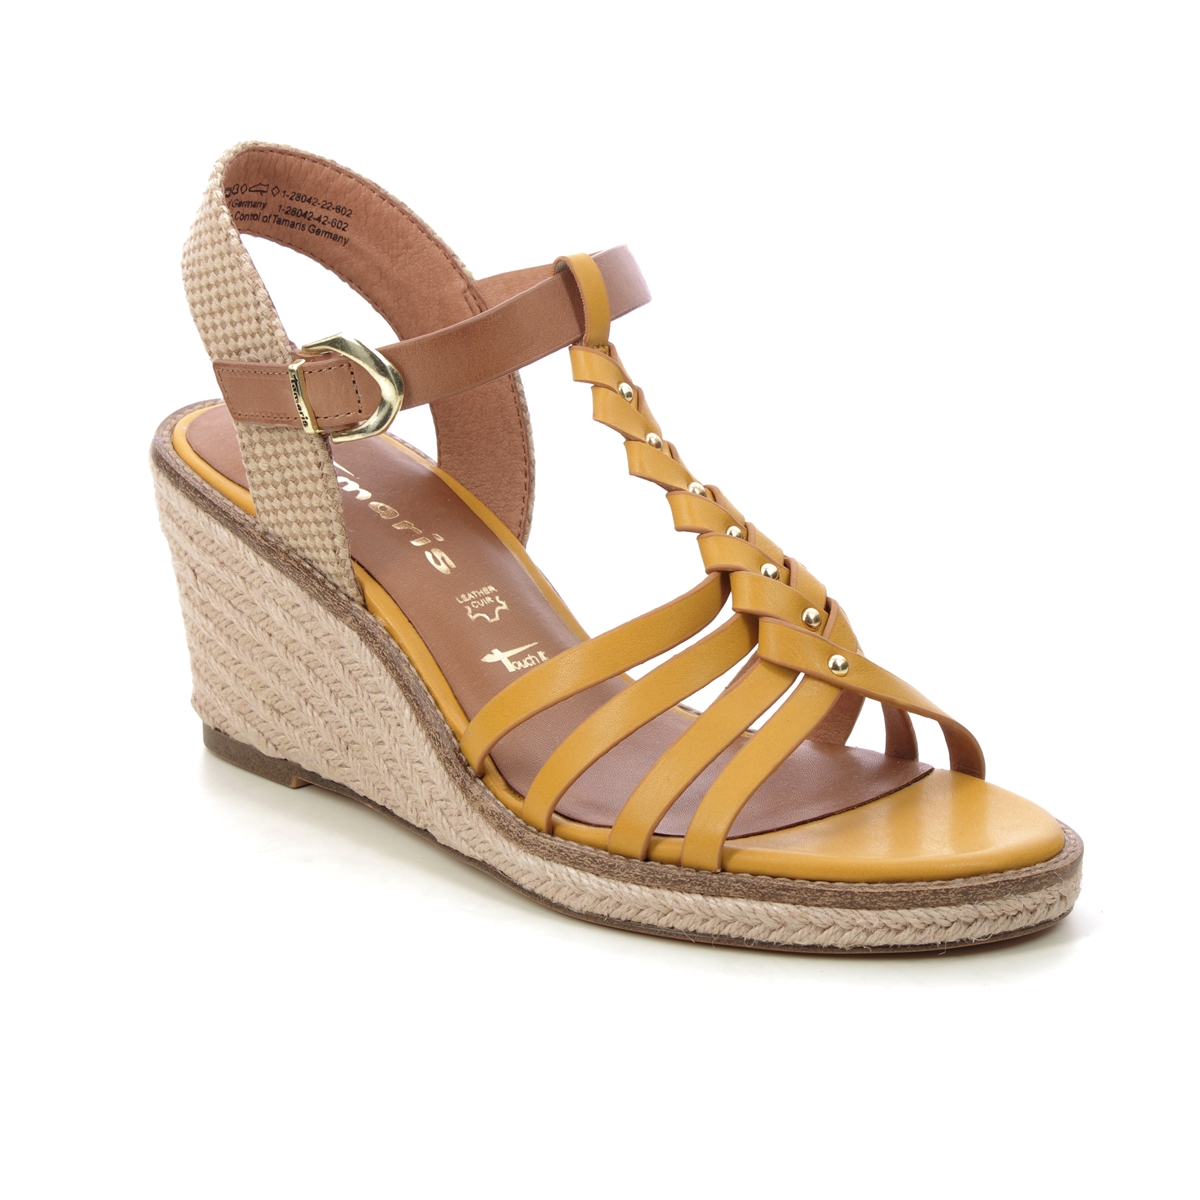 Tamaris Livi Espadrille Yellow Womens Wedge Sandals 28042-42-602 in a Plain Man-made in Size 41